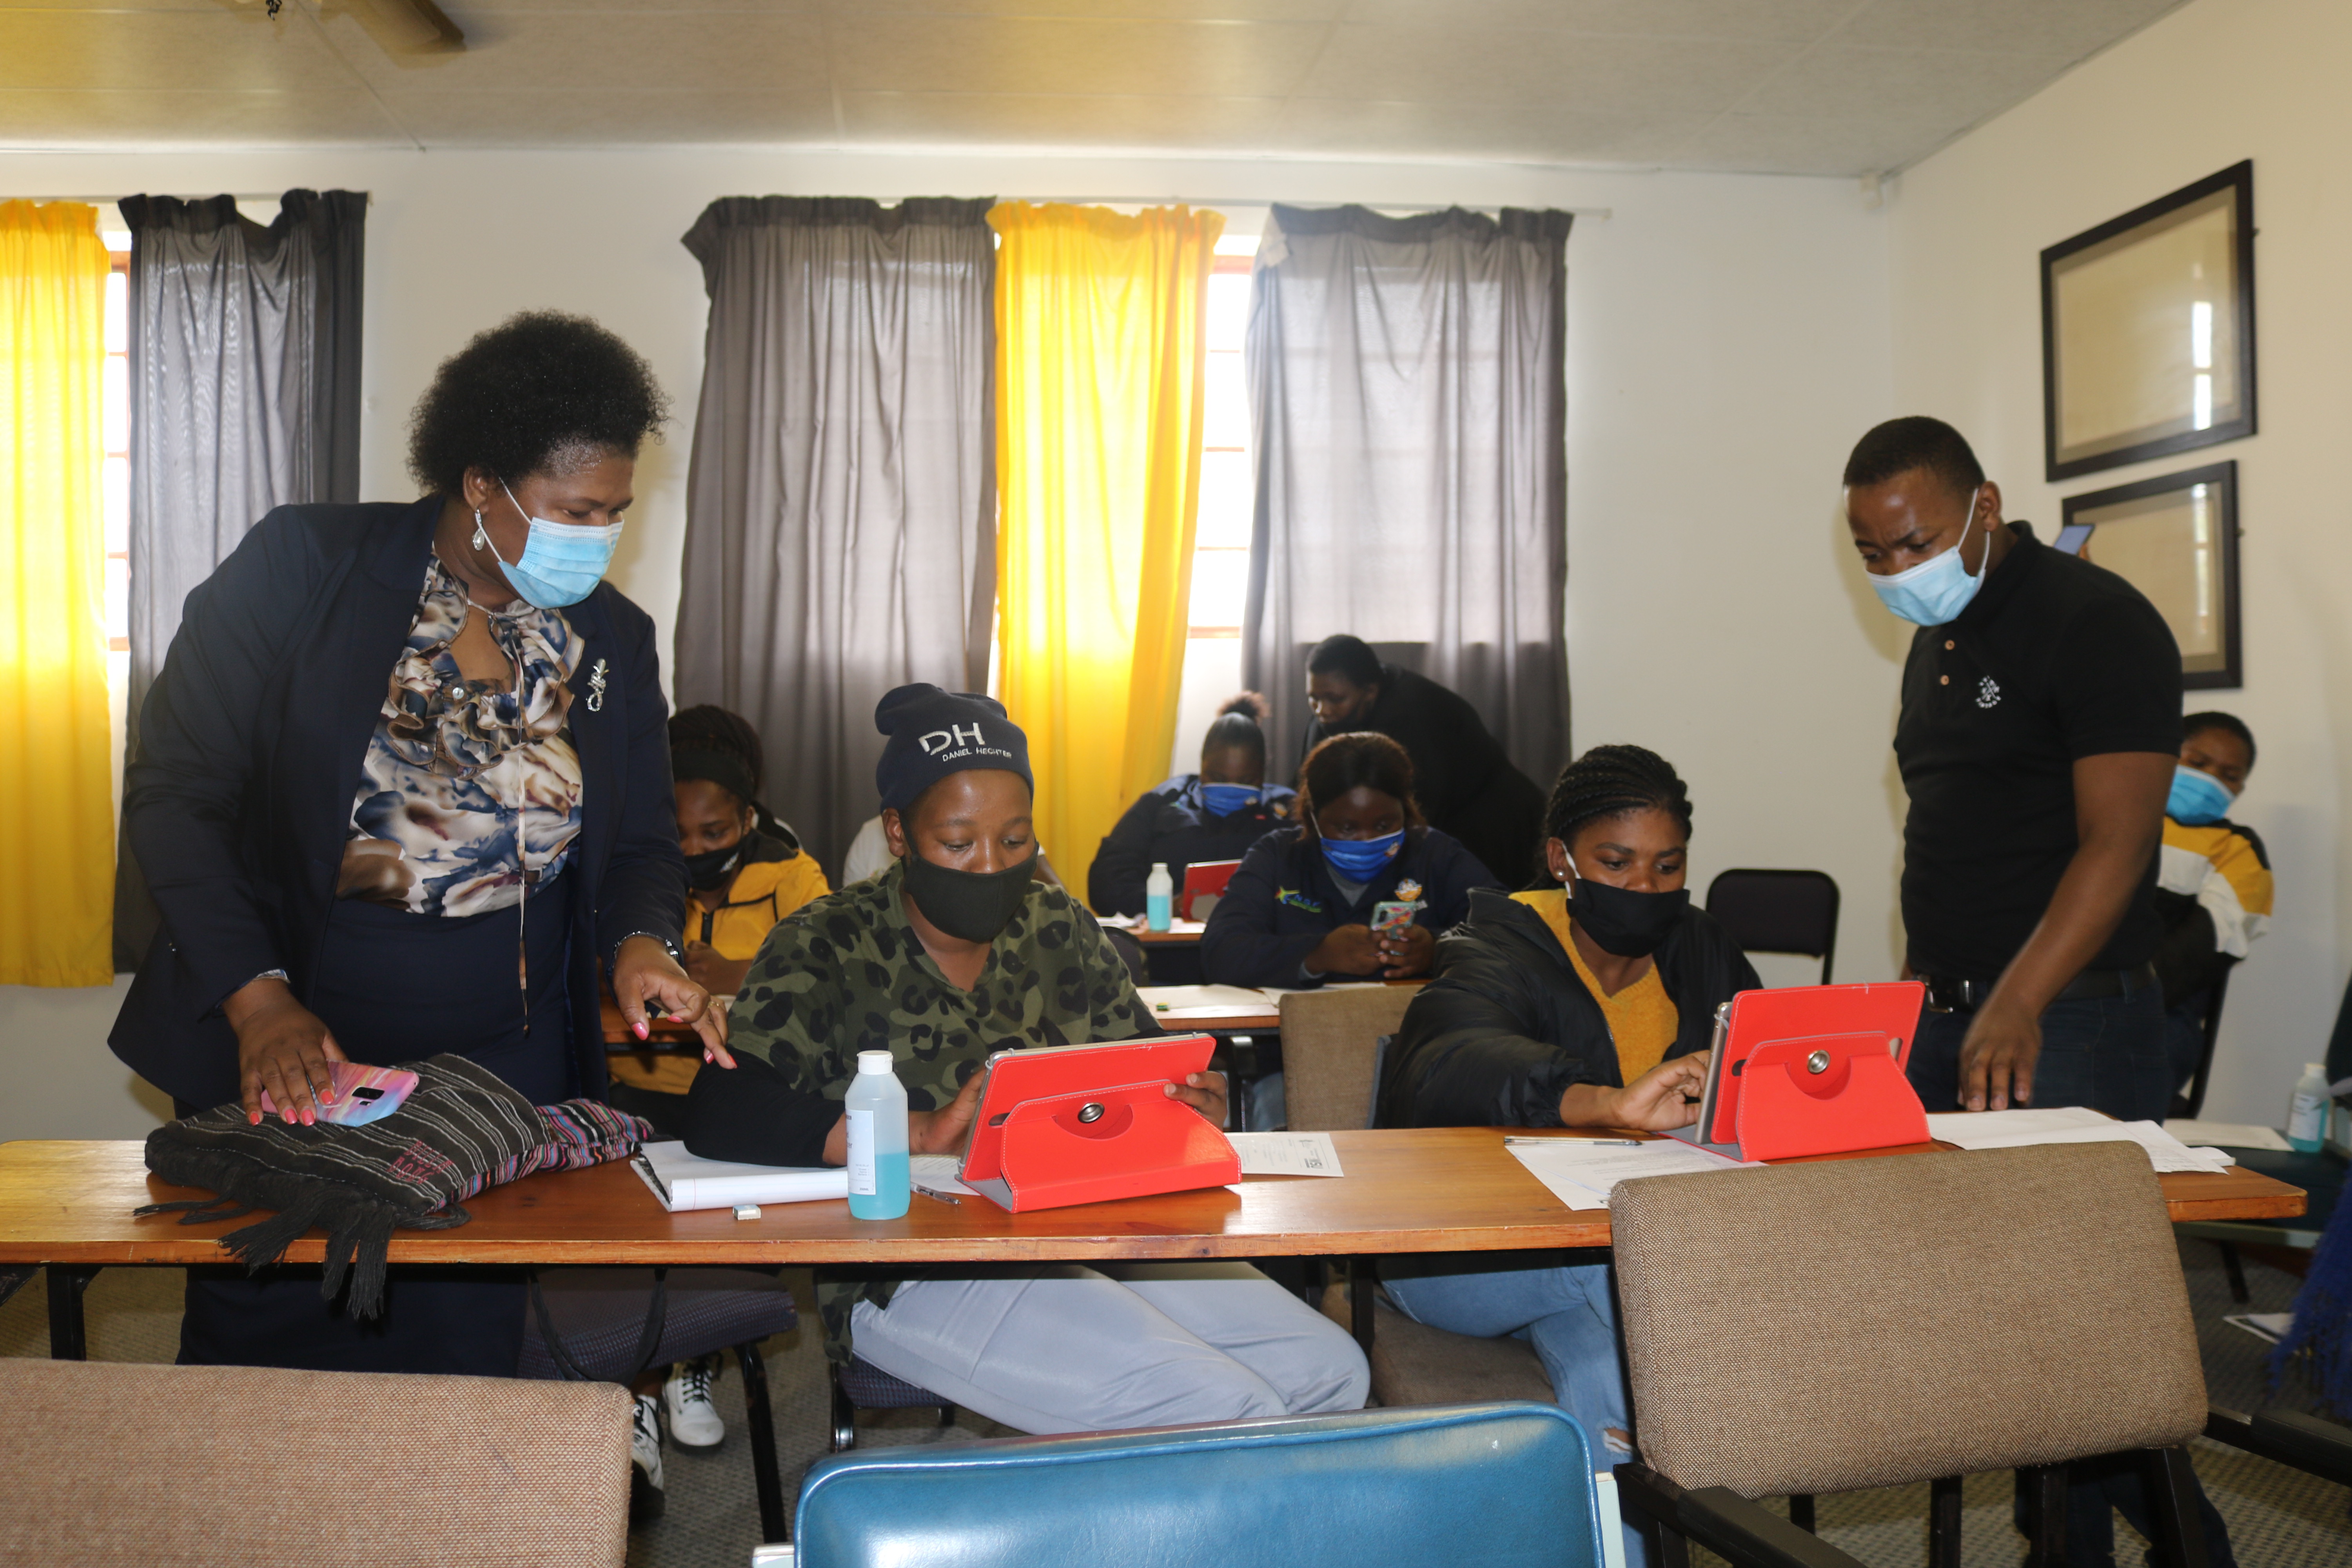 Above: Lovedale PSU staff assist Agritrade learners with digital literacy.